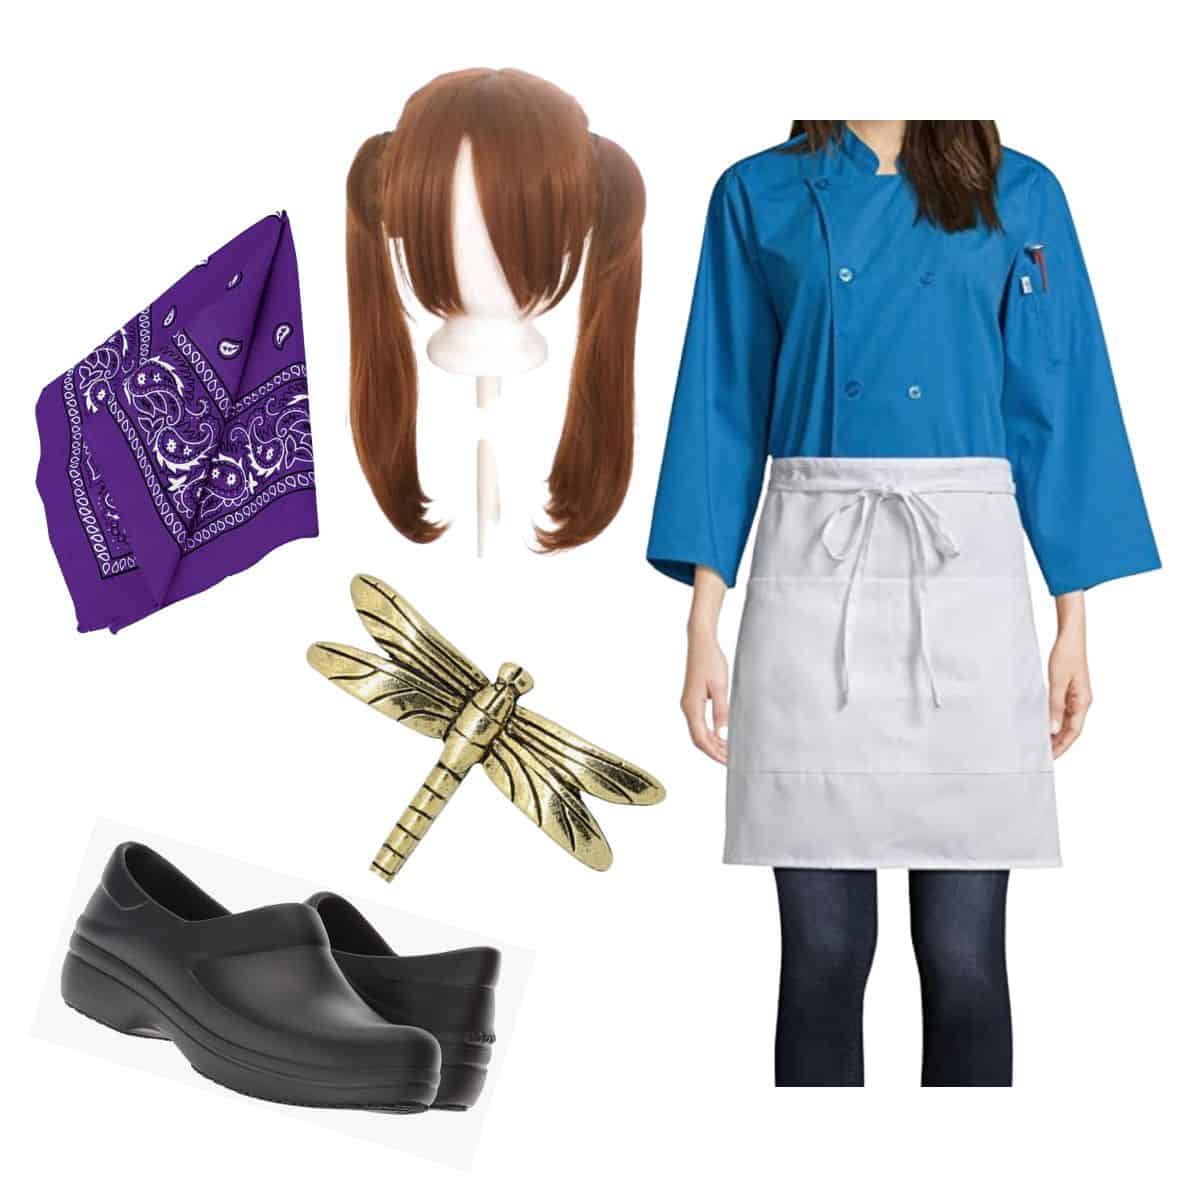 Sookie St. James Costume from Gilmore Girls (Cheap & Easy)